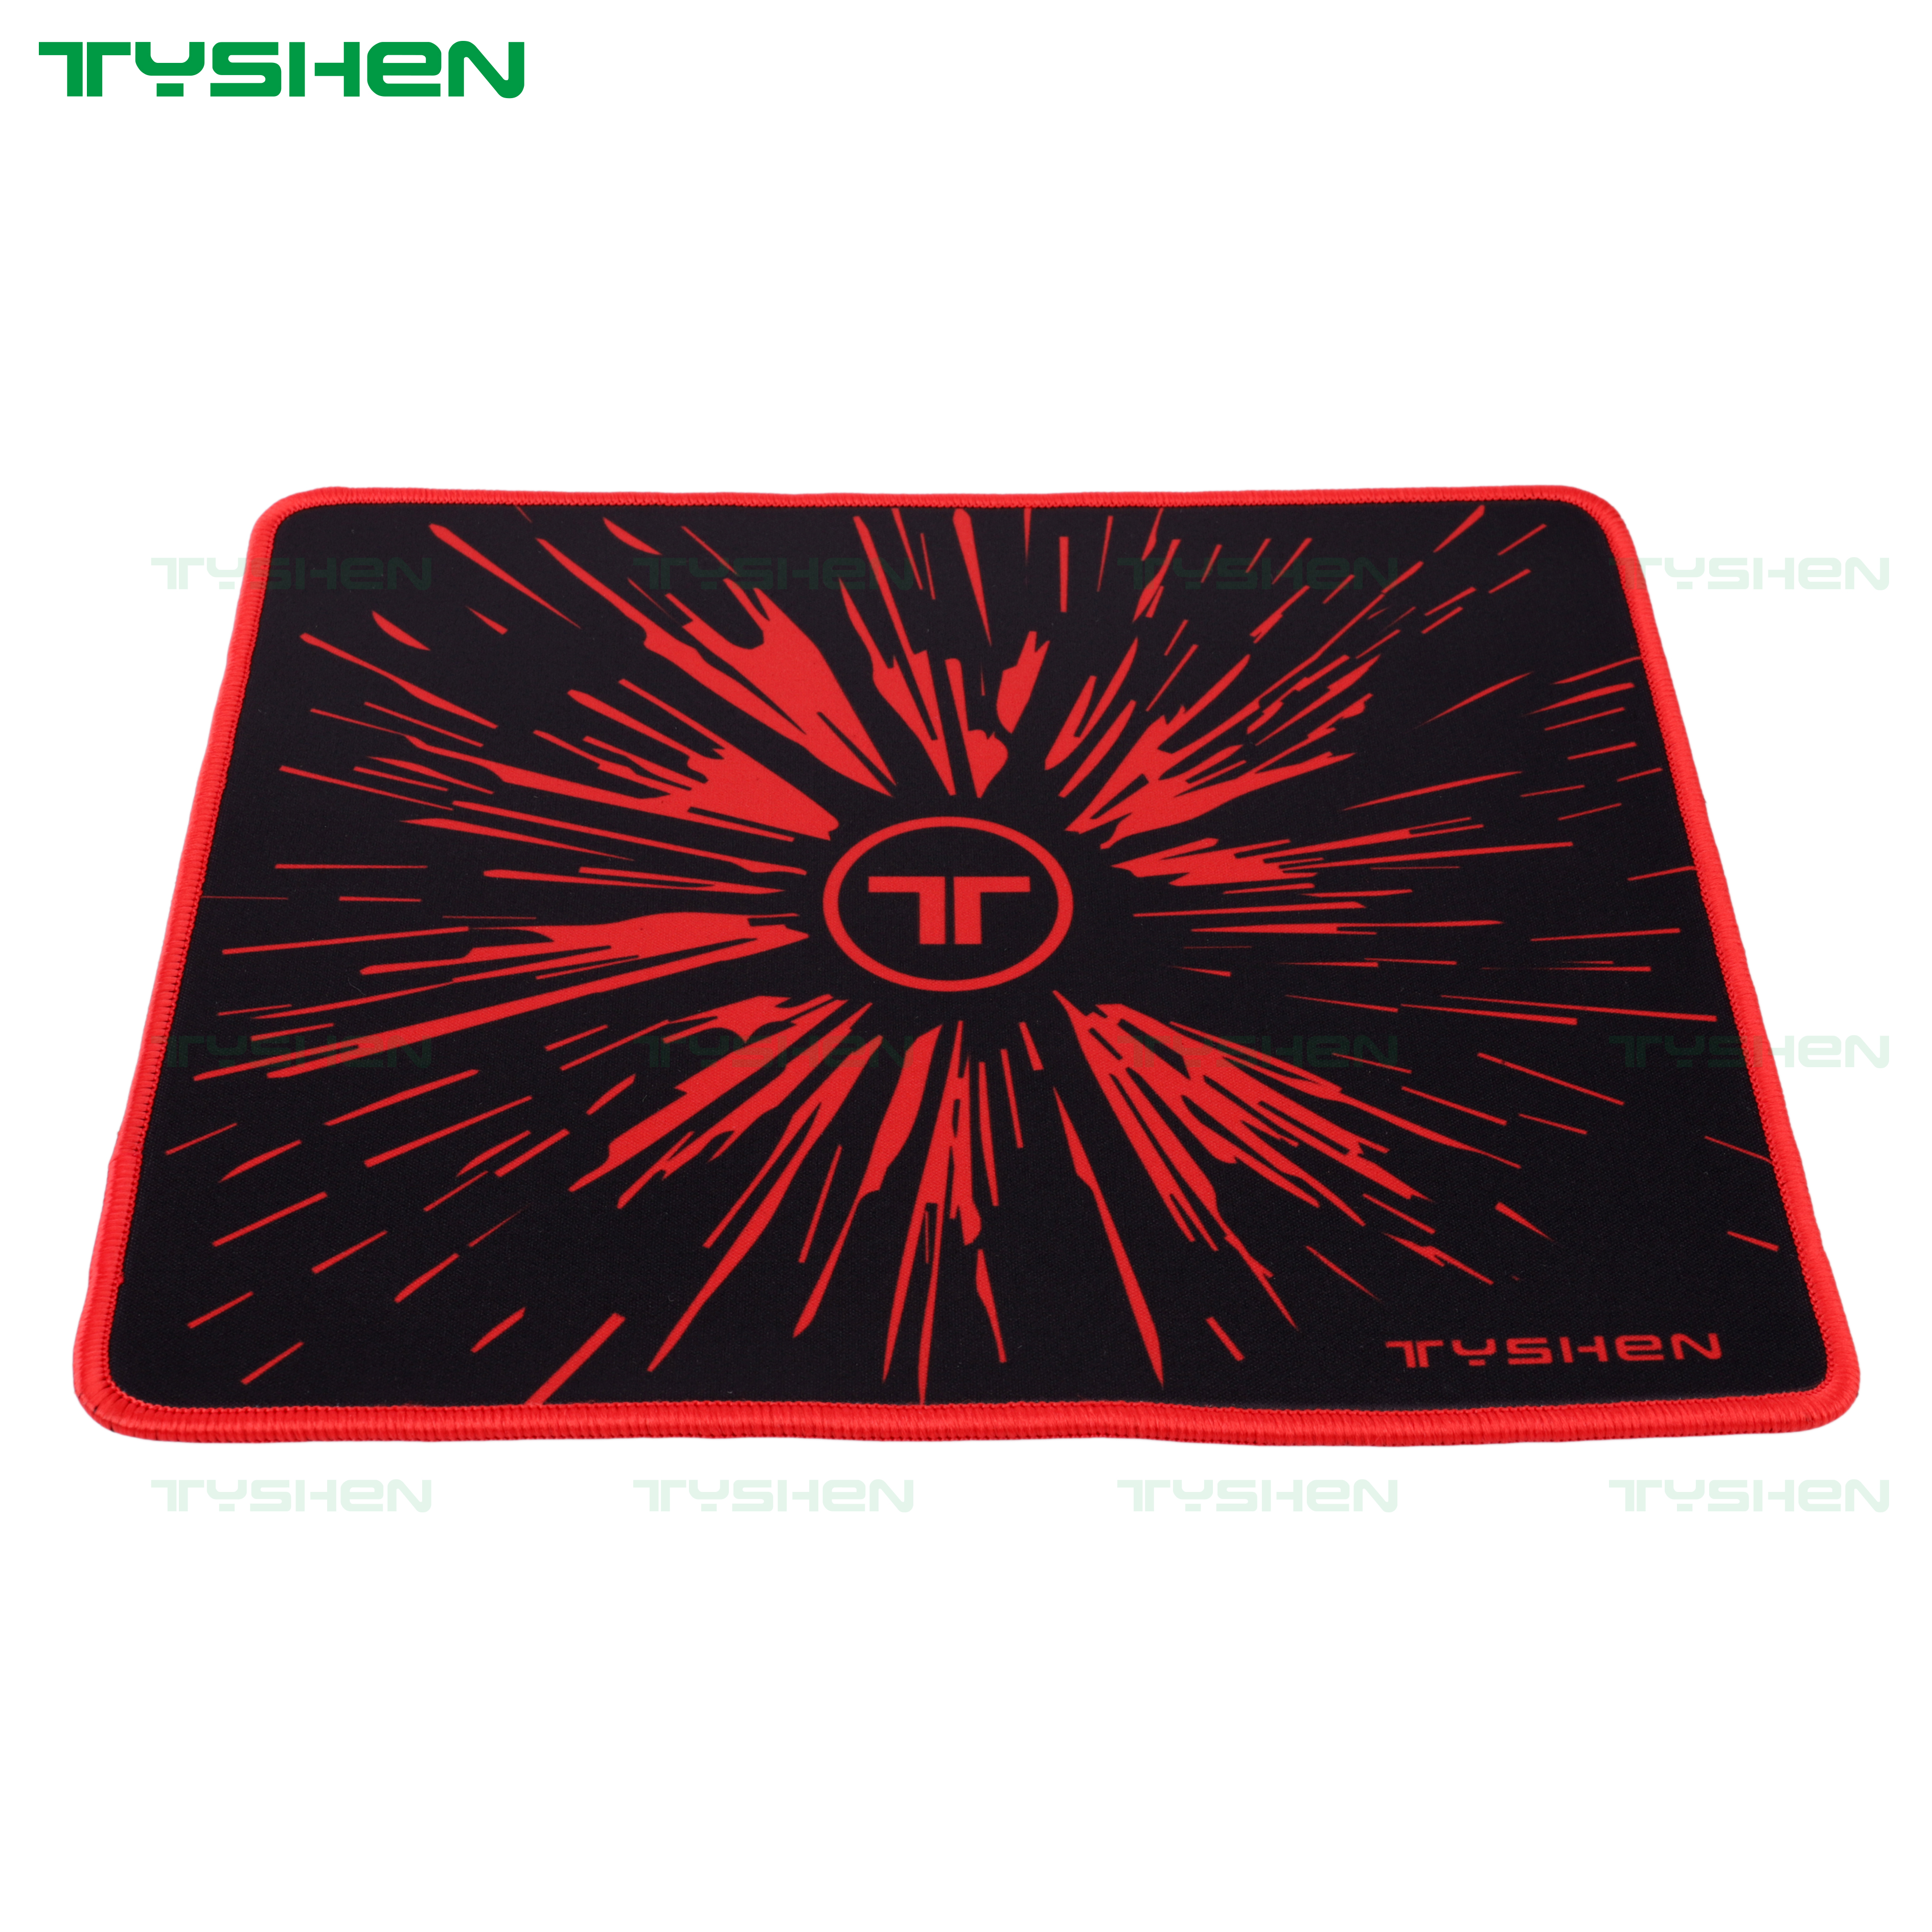 Wired 4 in One Gaming Combo PC RGB LED Light Table Keyboard Mouse Headphone and Mouse Pad Best OEM All in One Computer Combo